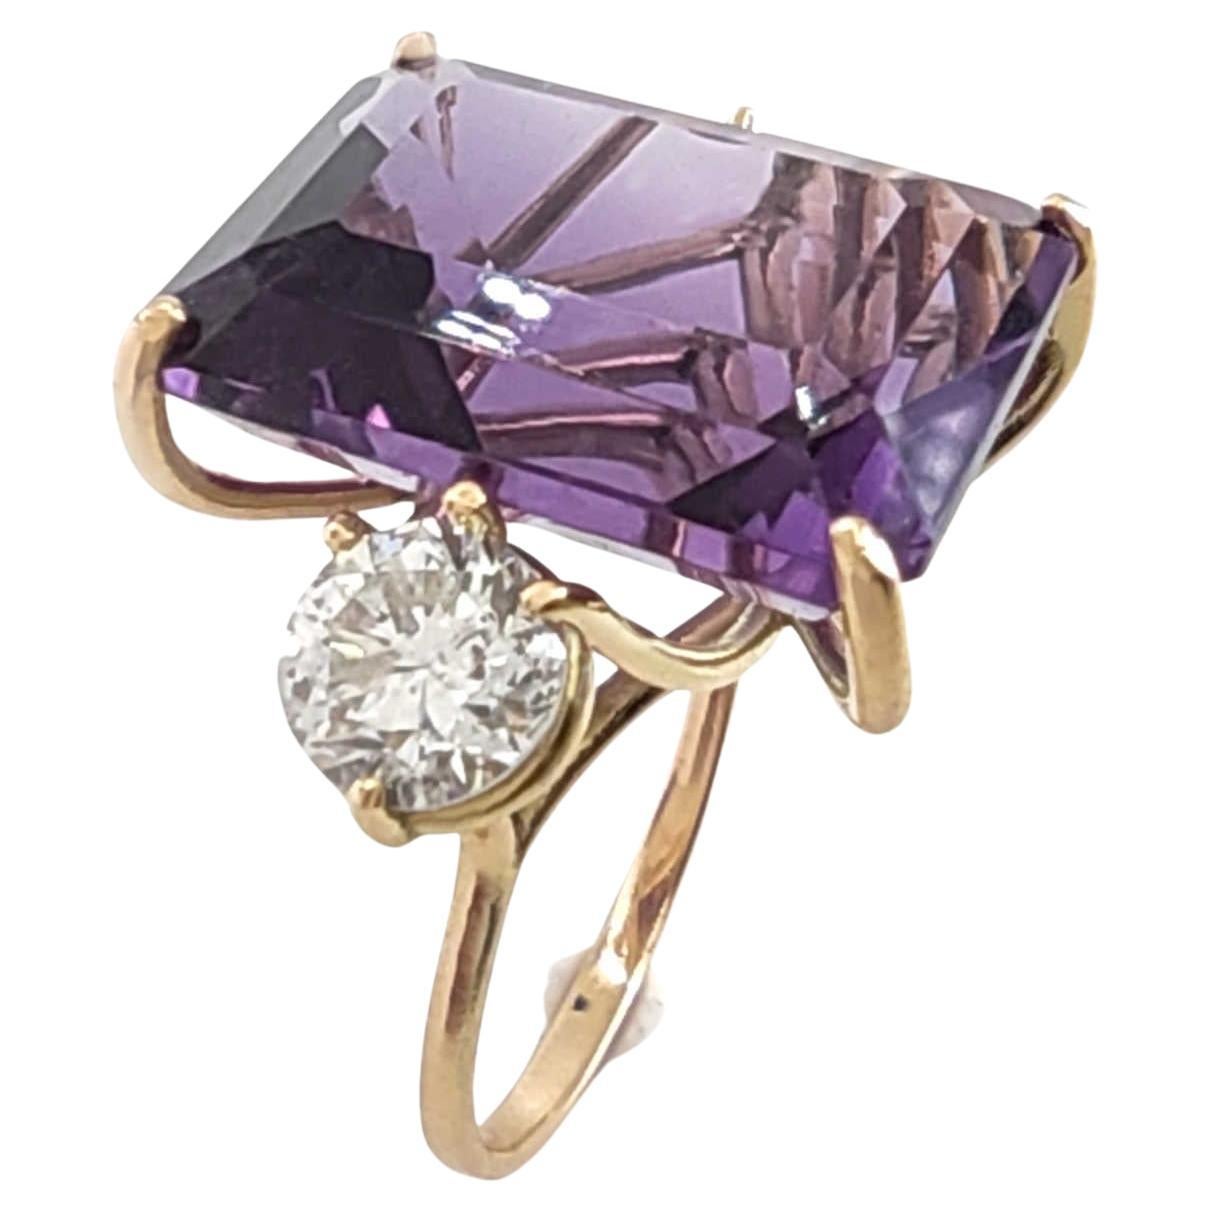 IGE Certified 17.28 Carat Amethyst Diamond Cocktail Ring For Sale